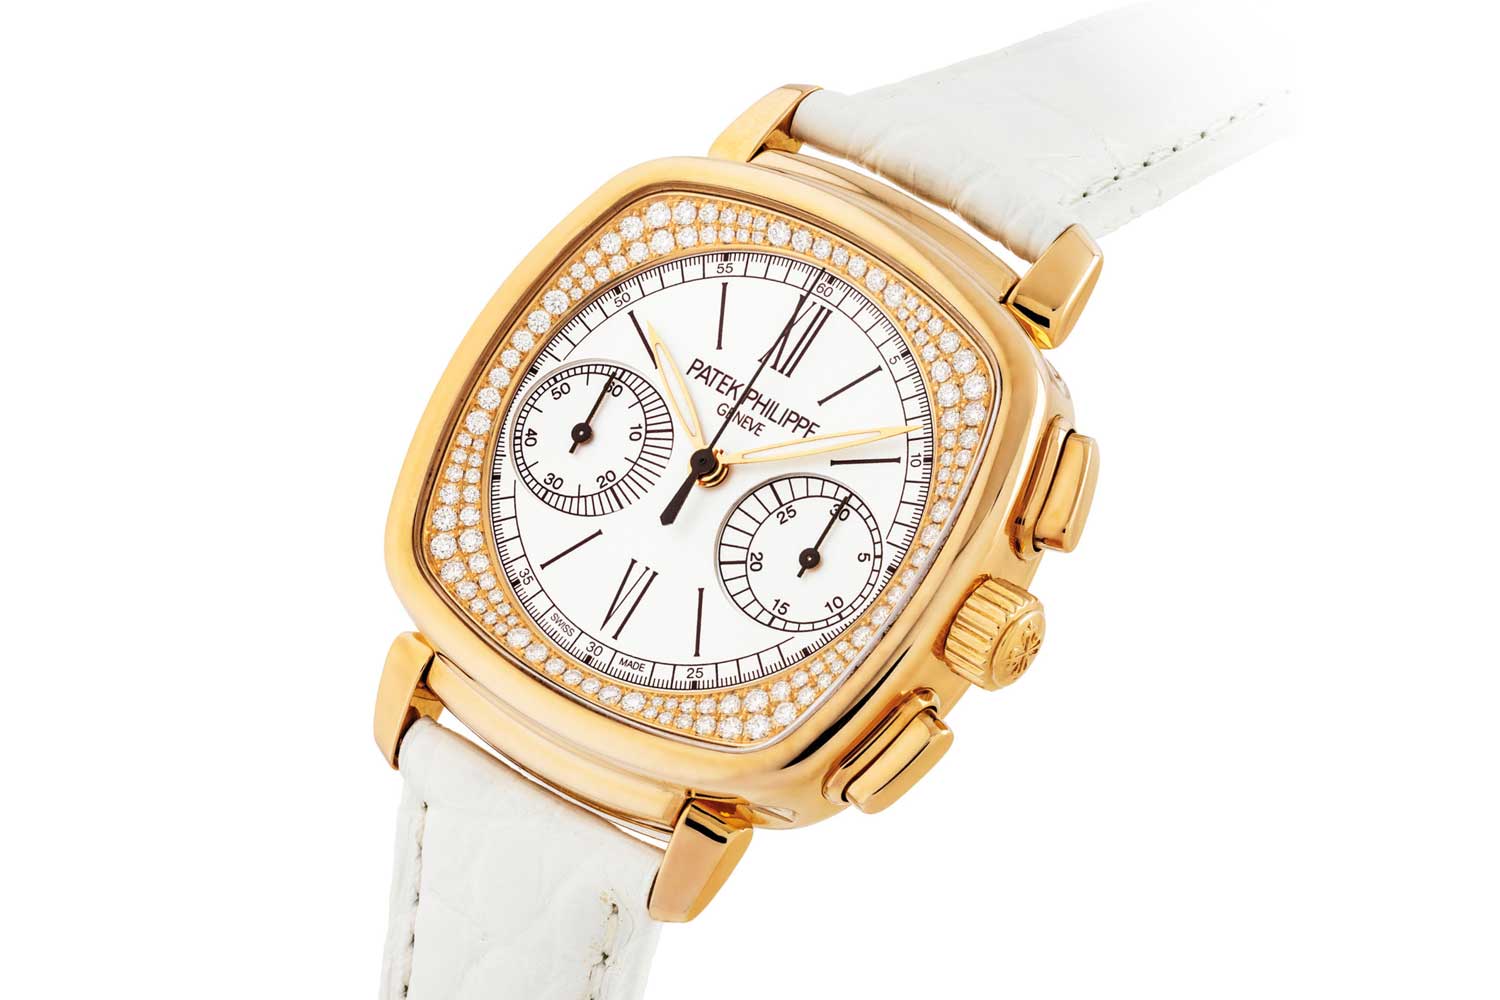 The Patek Philippe Ref. 7071R-001, powered by the CH 29-535 (Image: christies.com)